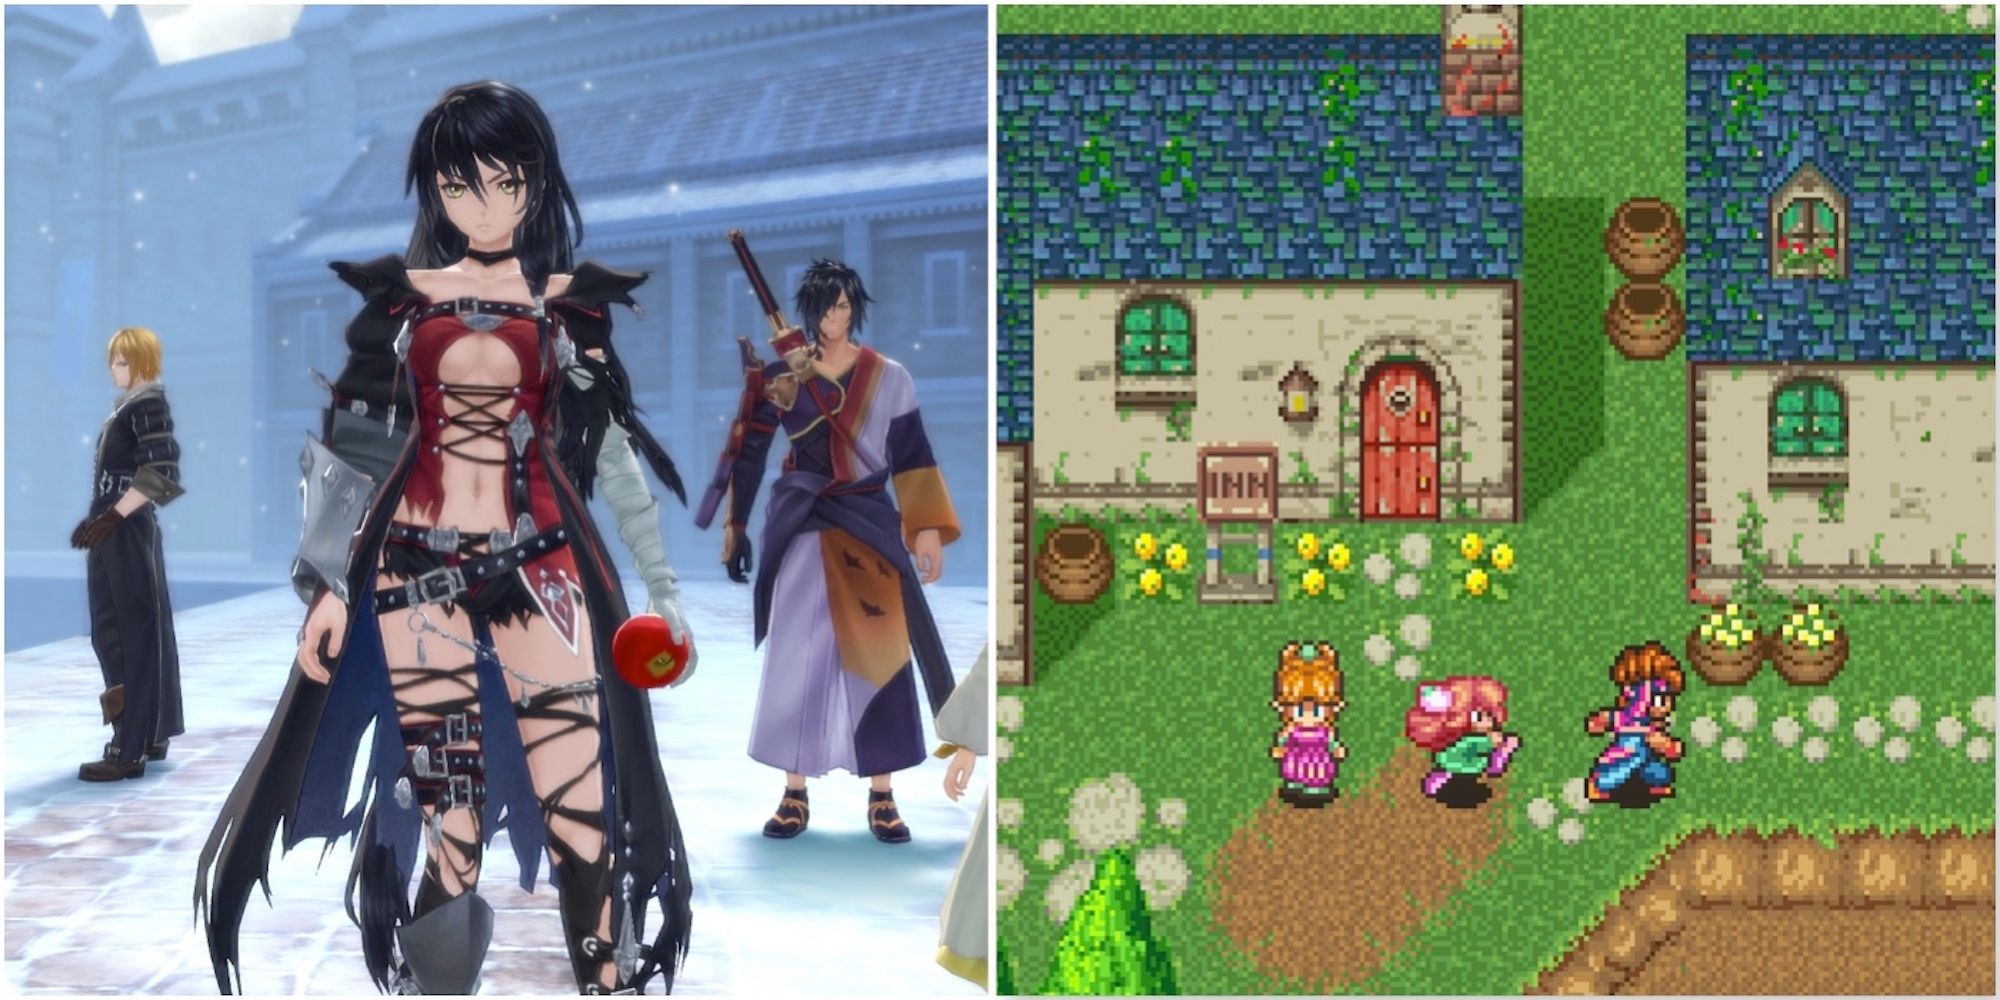 A cutscene featuring characters in Tales Of Berseria and Exploring the world in Secret Of Mana